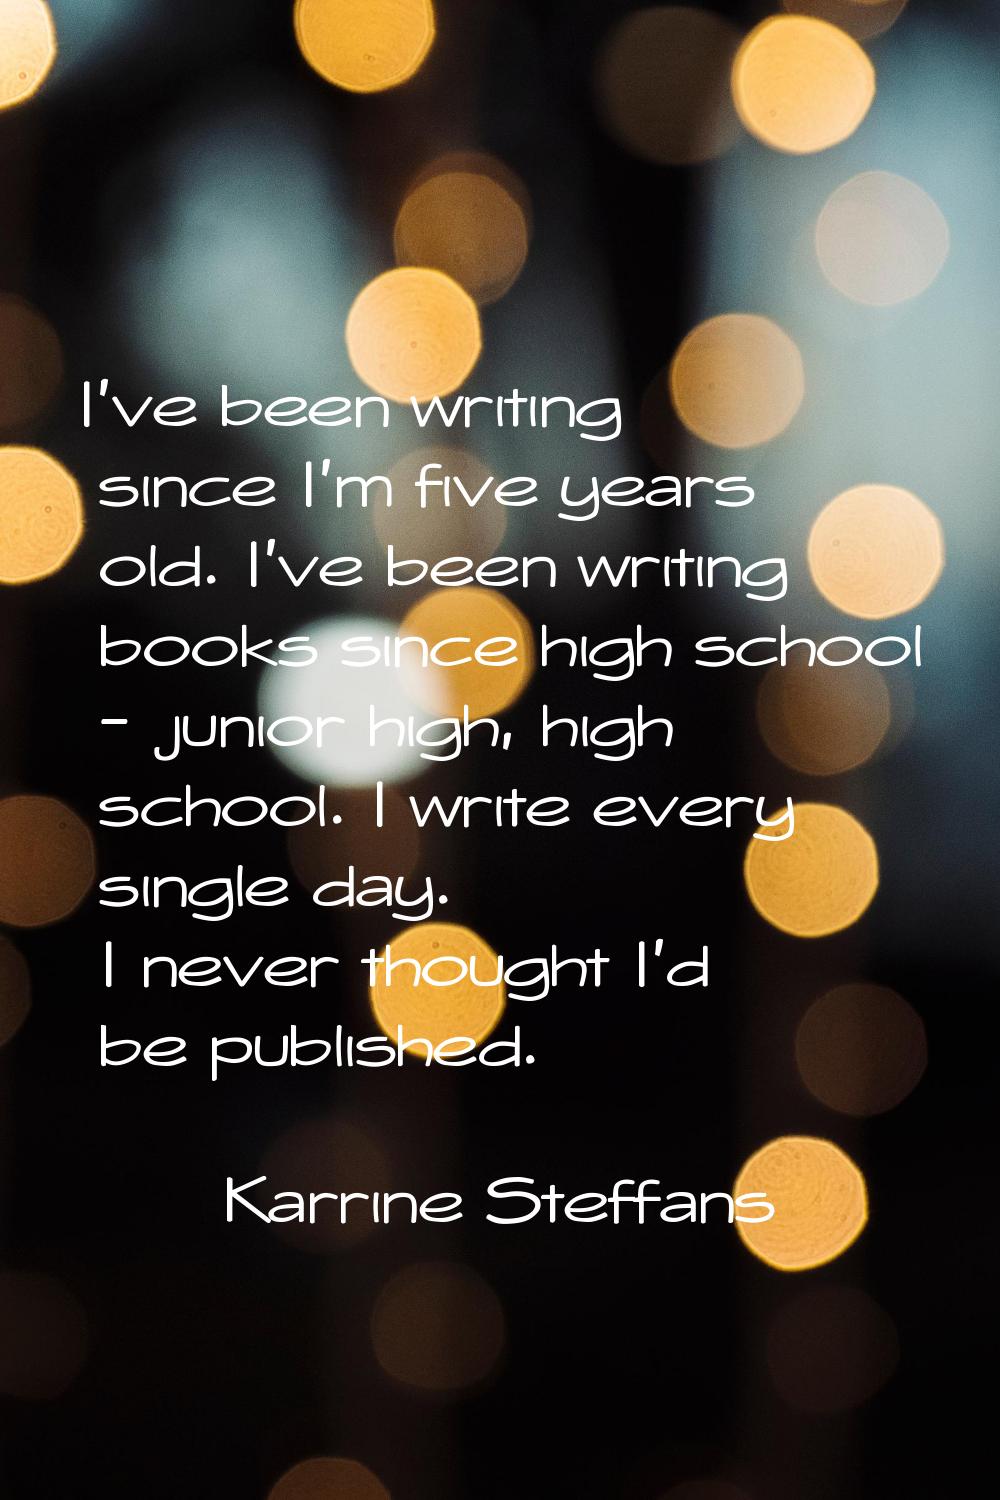 I've been writing since I'm five years old. I've been writing books since high school - junior high